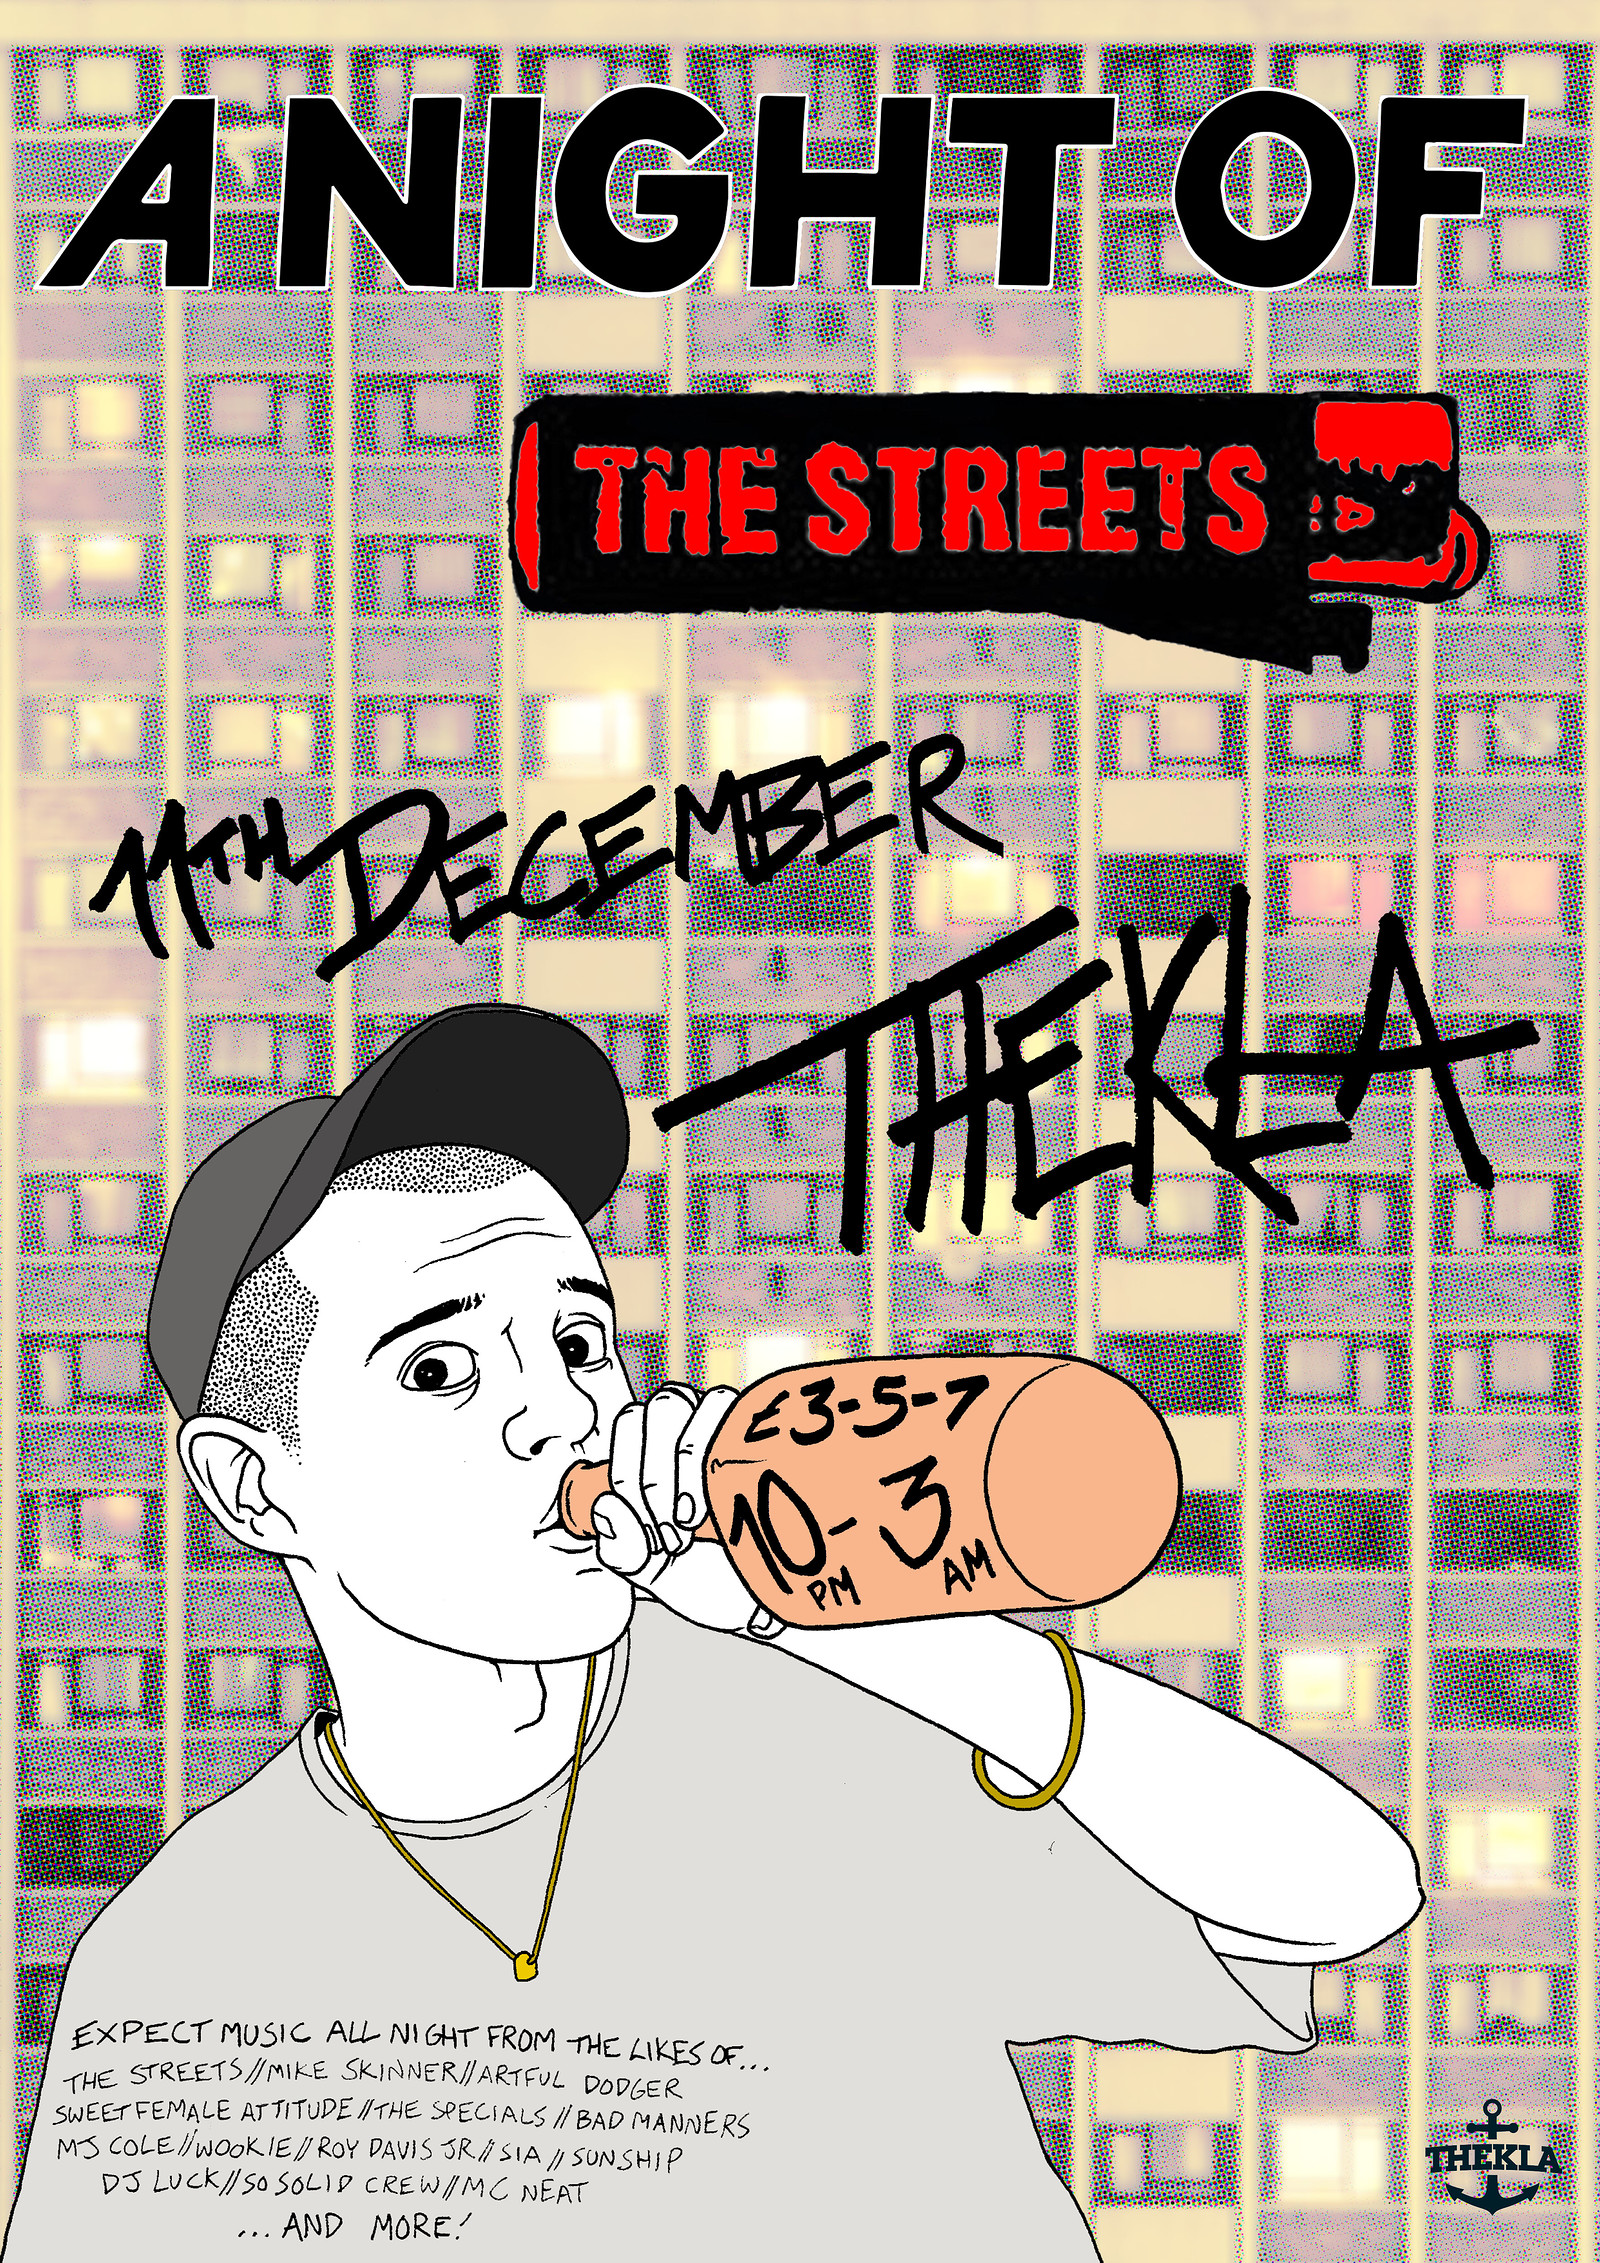 A Night Of: The Streets at Thekla